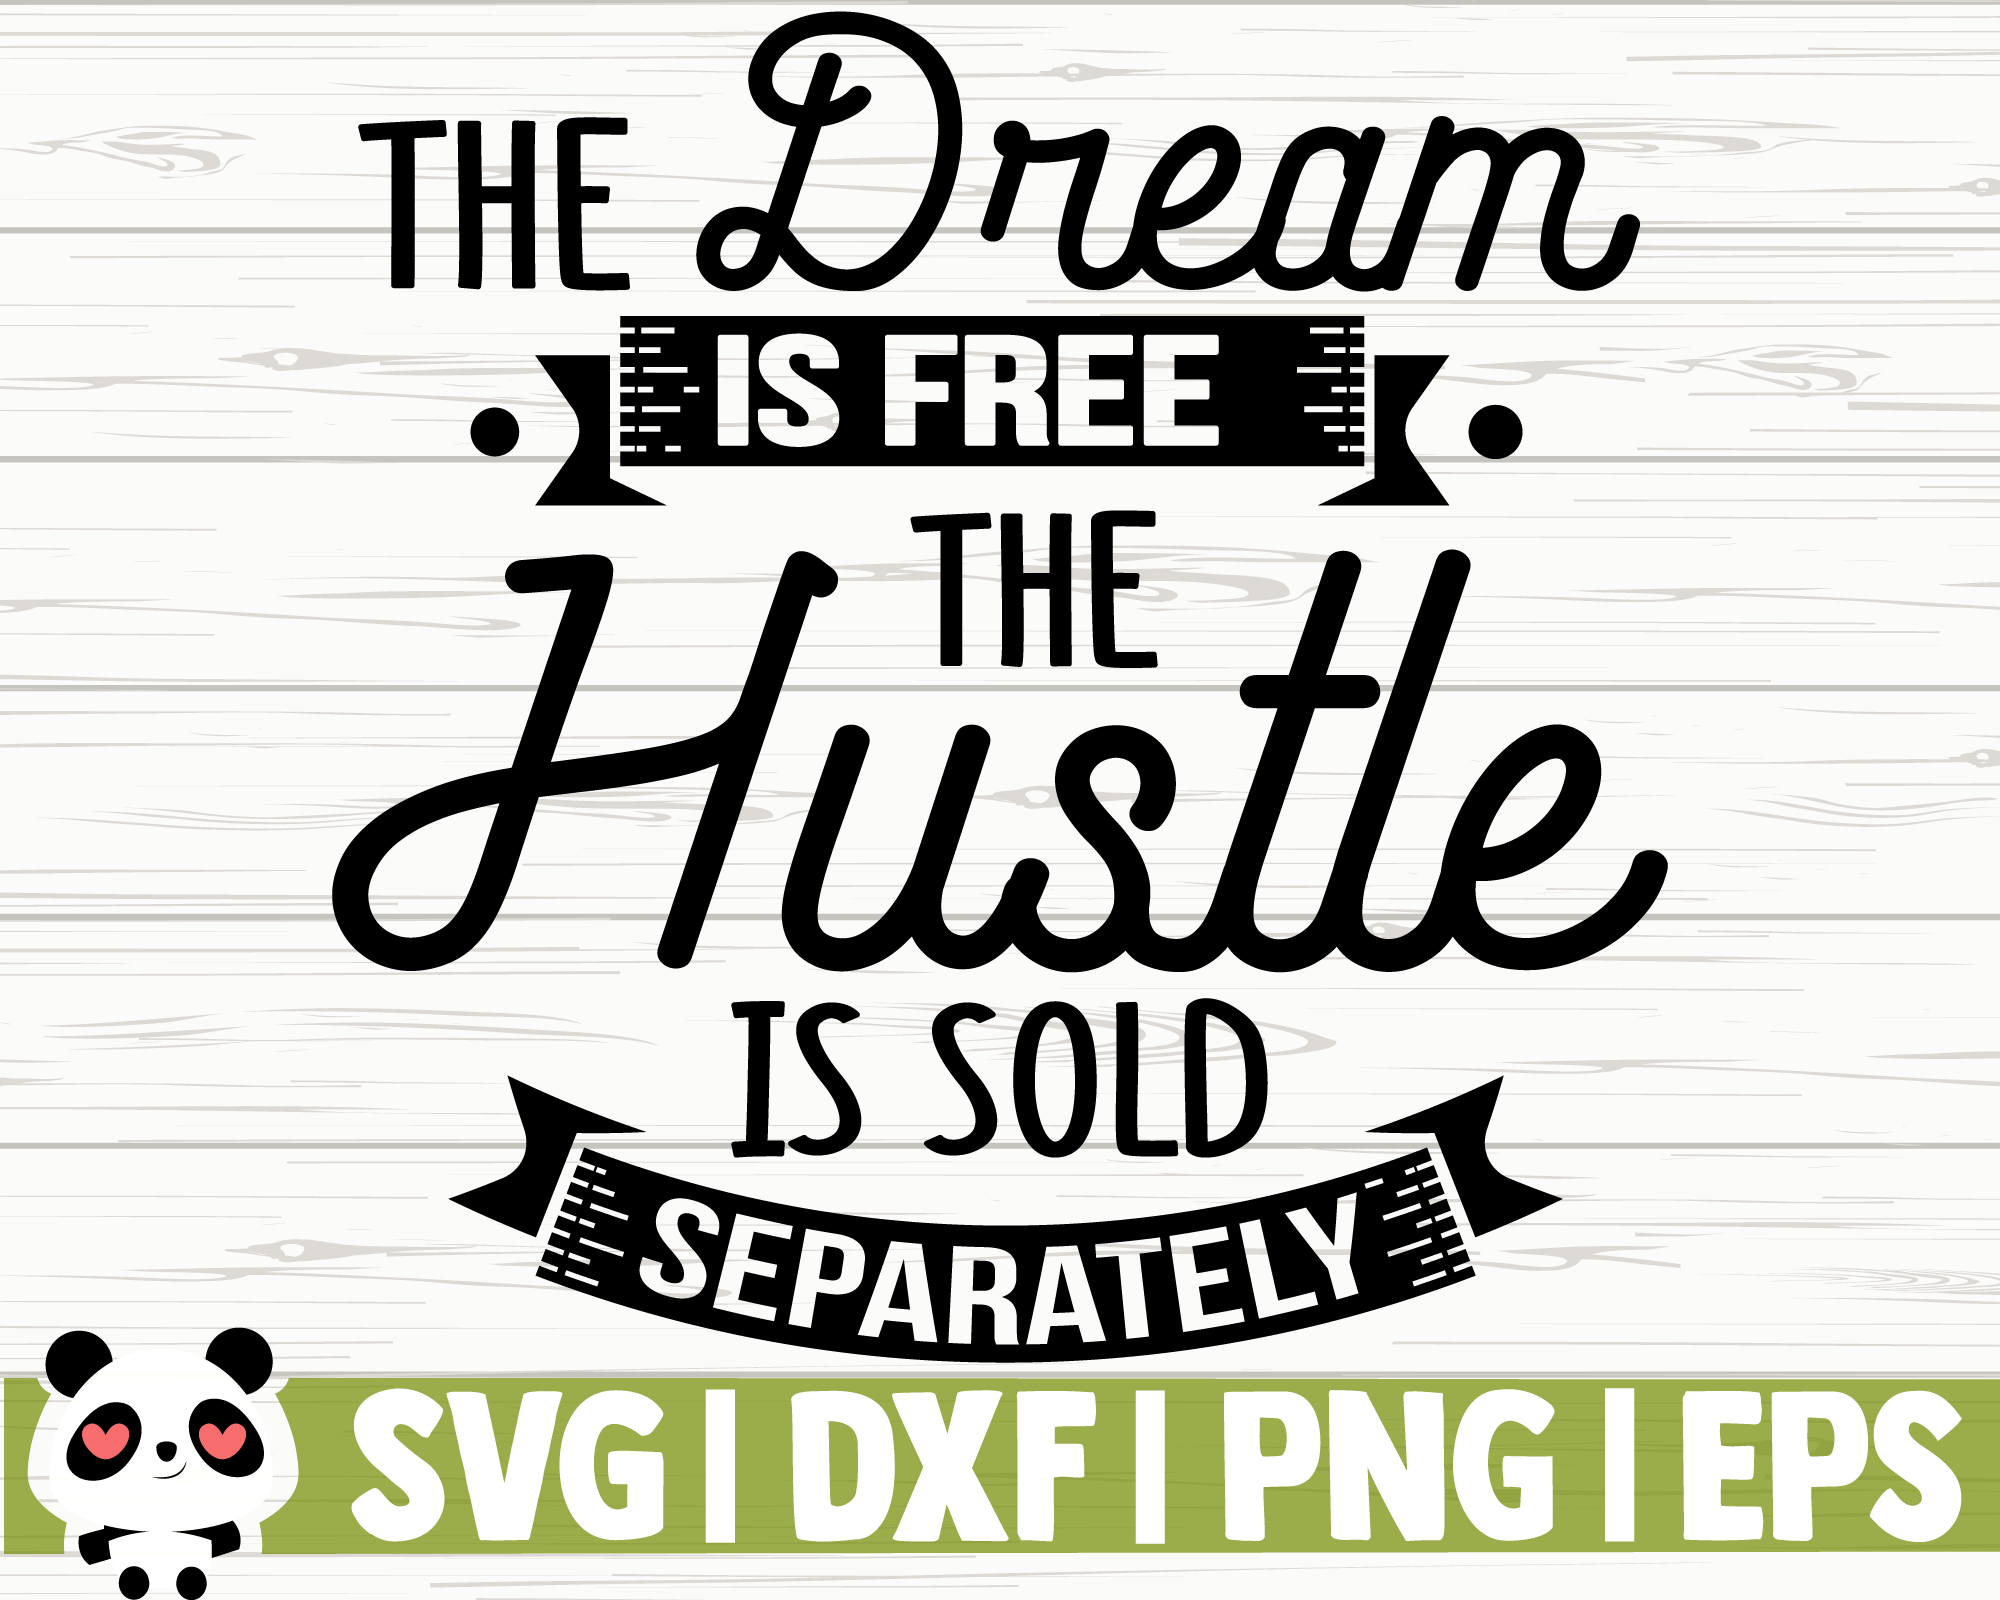 Free is dream separately is the sold hustle the The dream